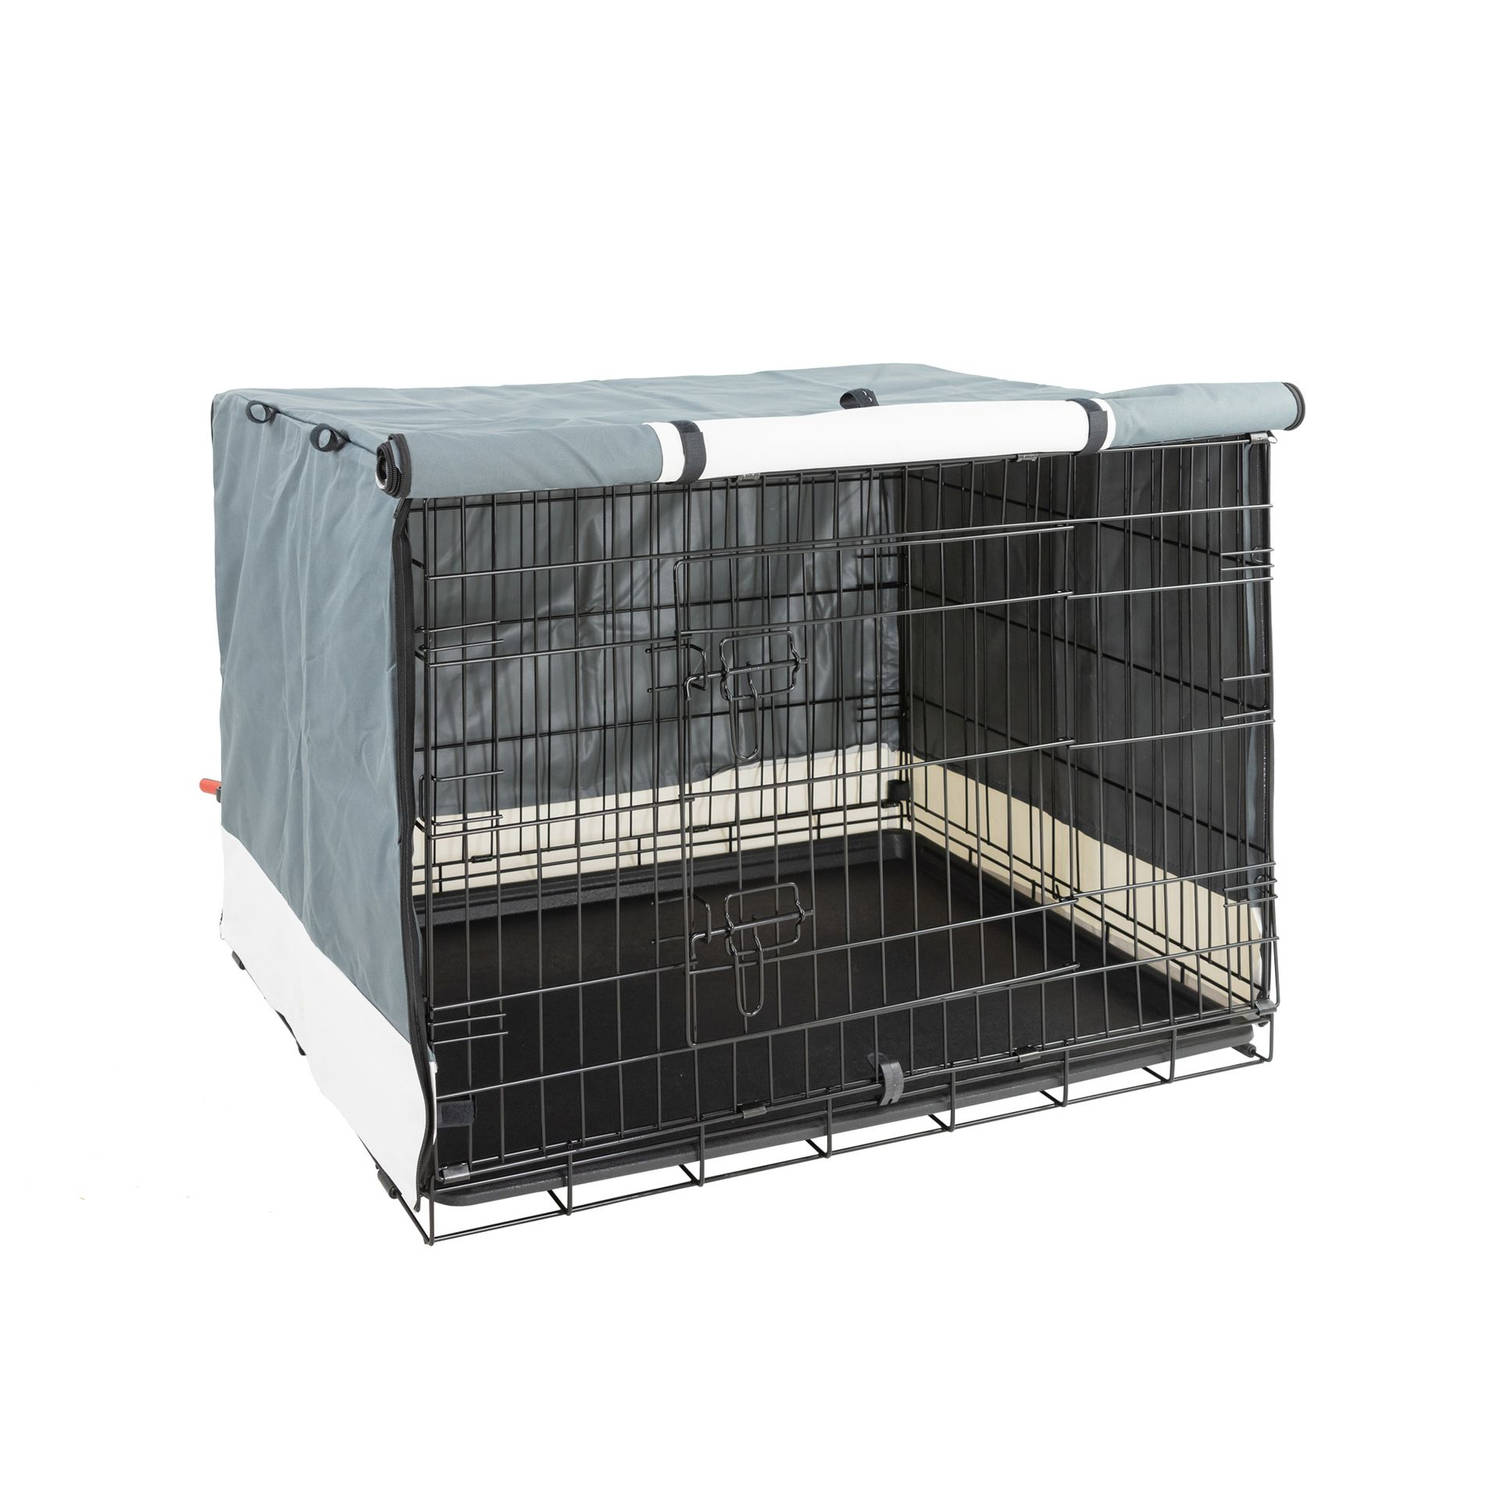 MaxxPet Benchhoes Benchoezen Benchcover cover voor hondenbench 78x48x56cm